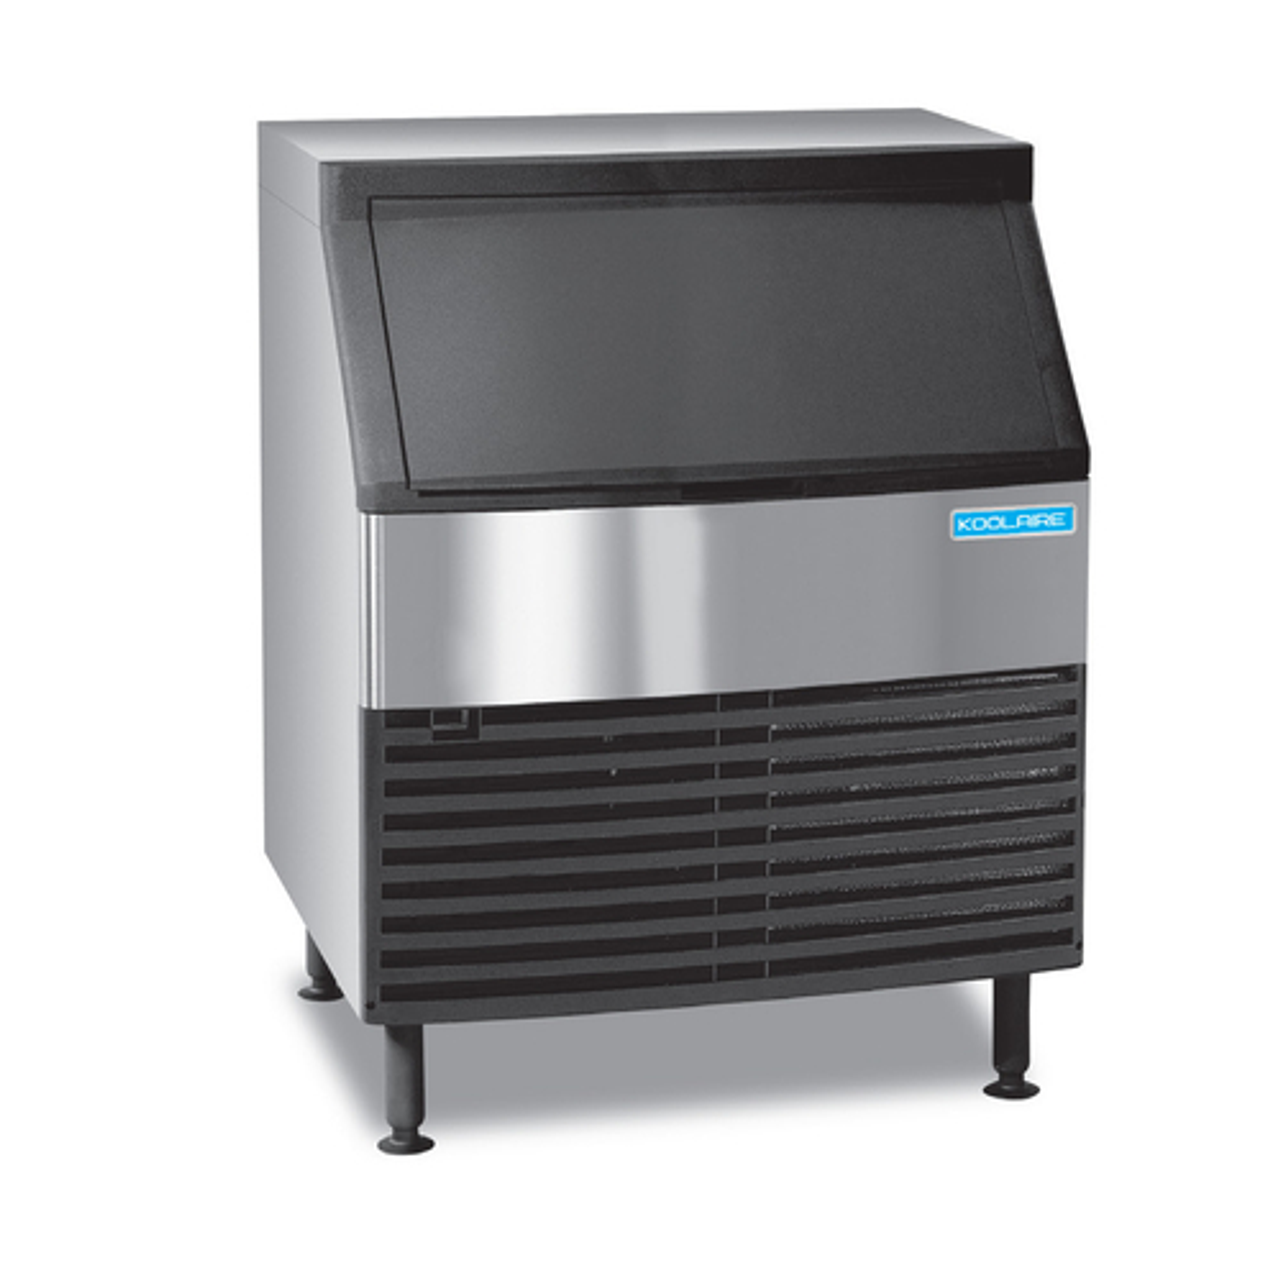 Koolaire Undercounter Ice Kube Machine with Bin, cube-style, 258 lb, KYF0250A